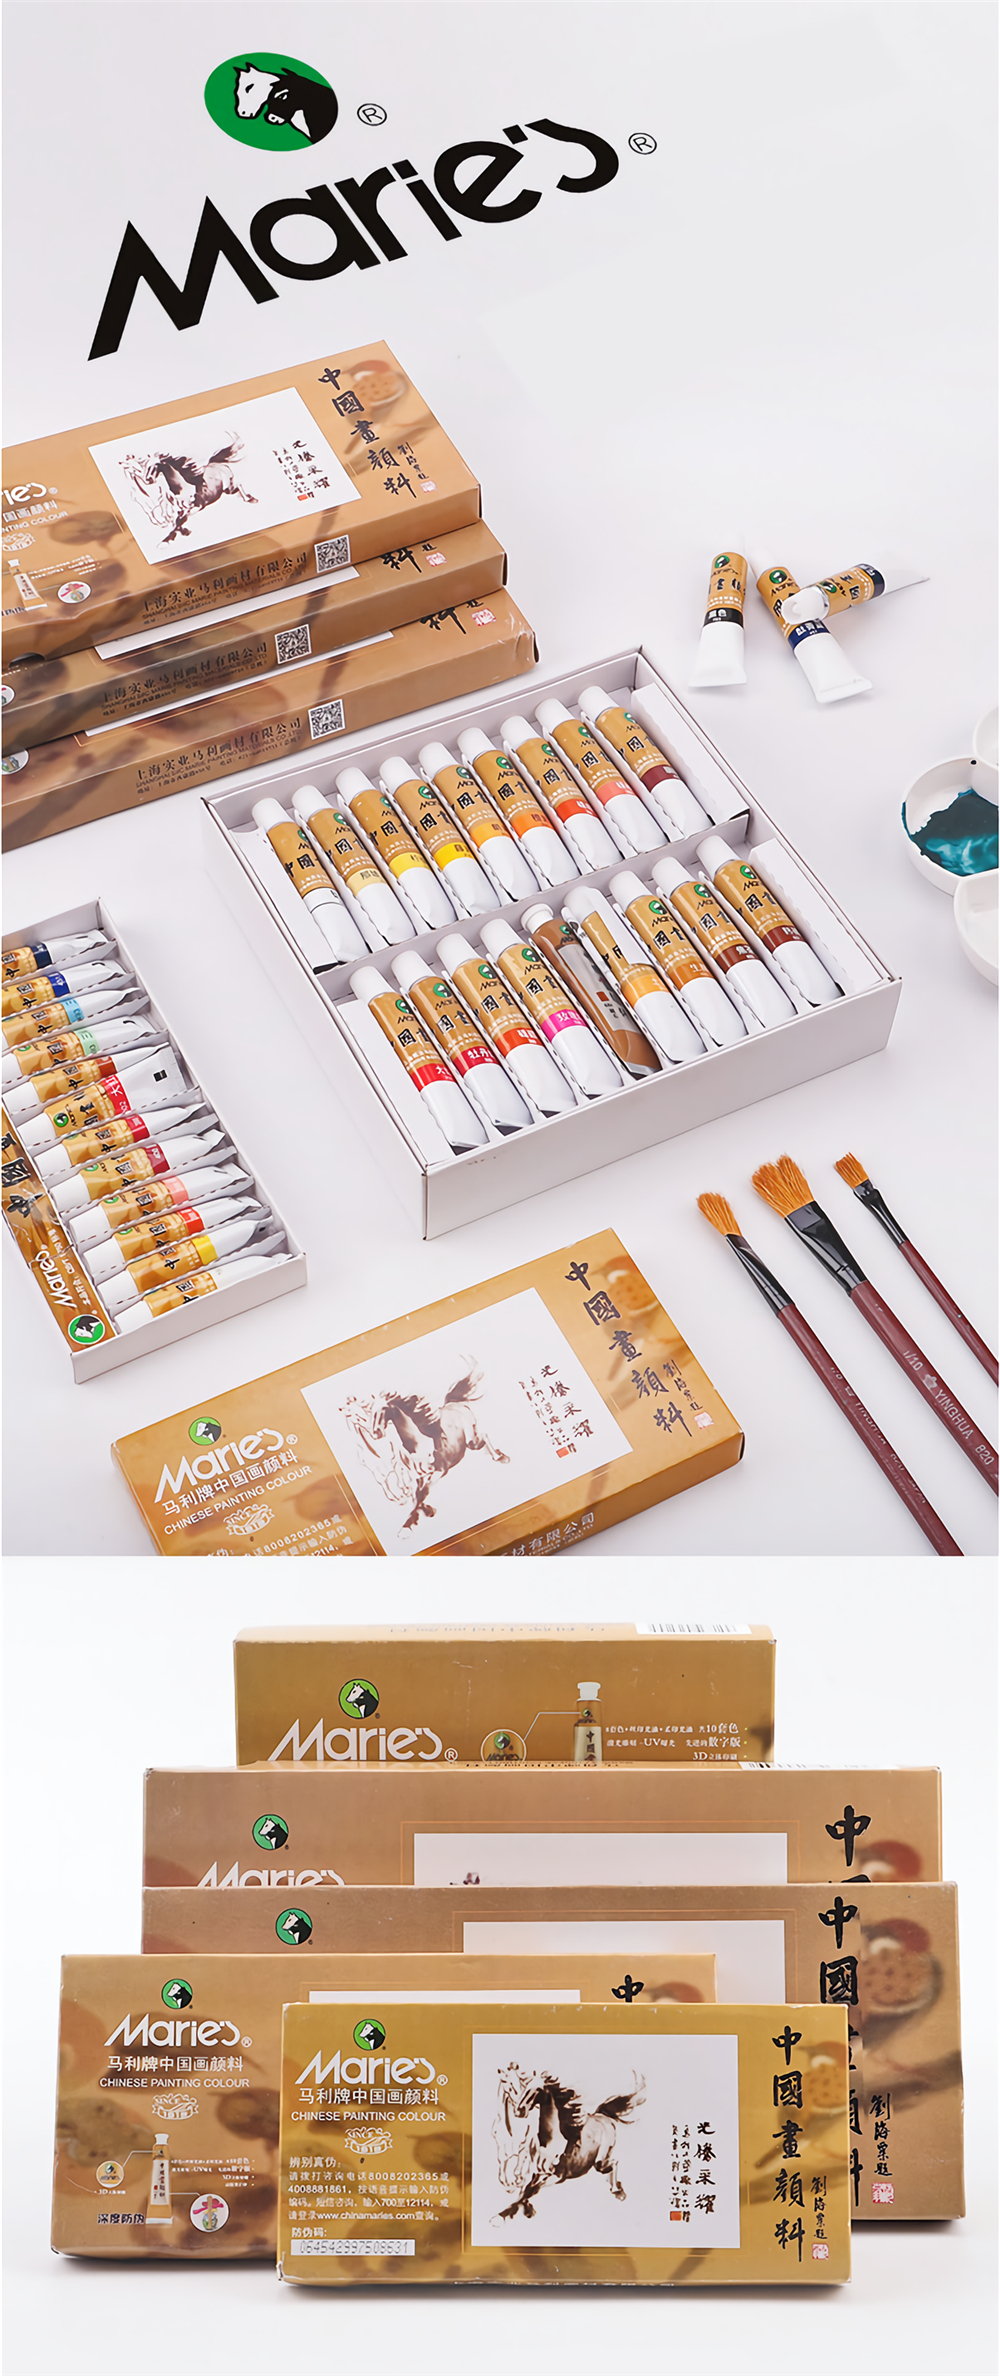 Maries-182436-Colors-Watercolor-Paint-Set-Oil-Painting-Pigment-School-Art-Drawing-Supplies-Profesion-1540689-1